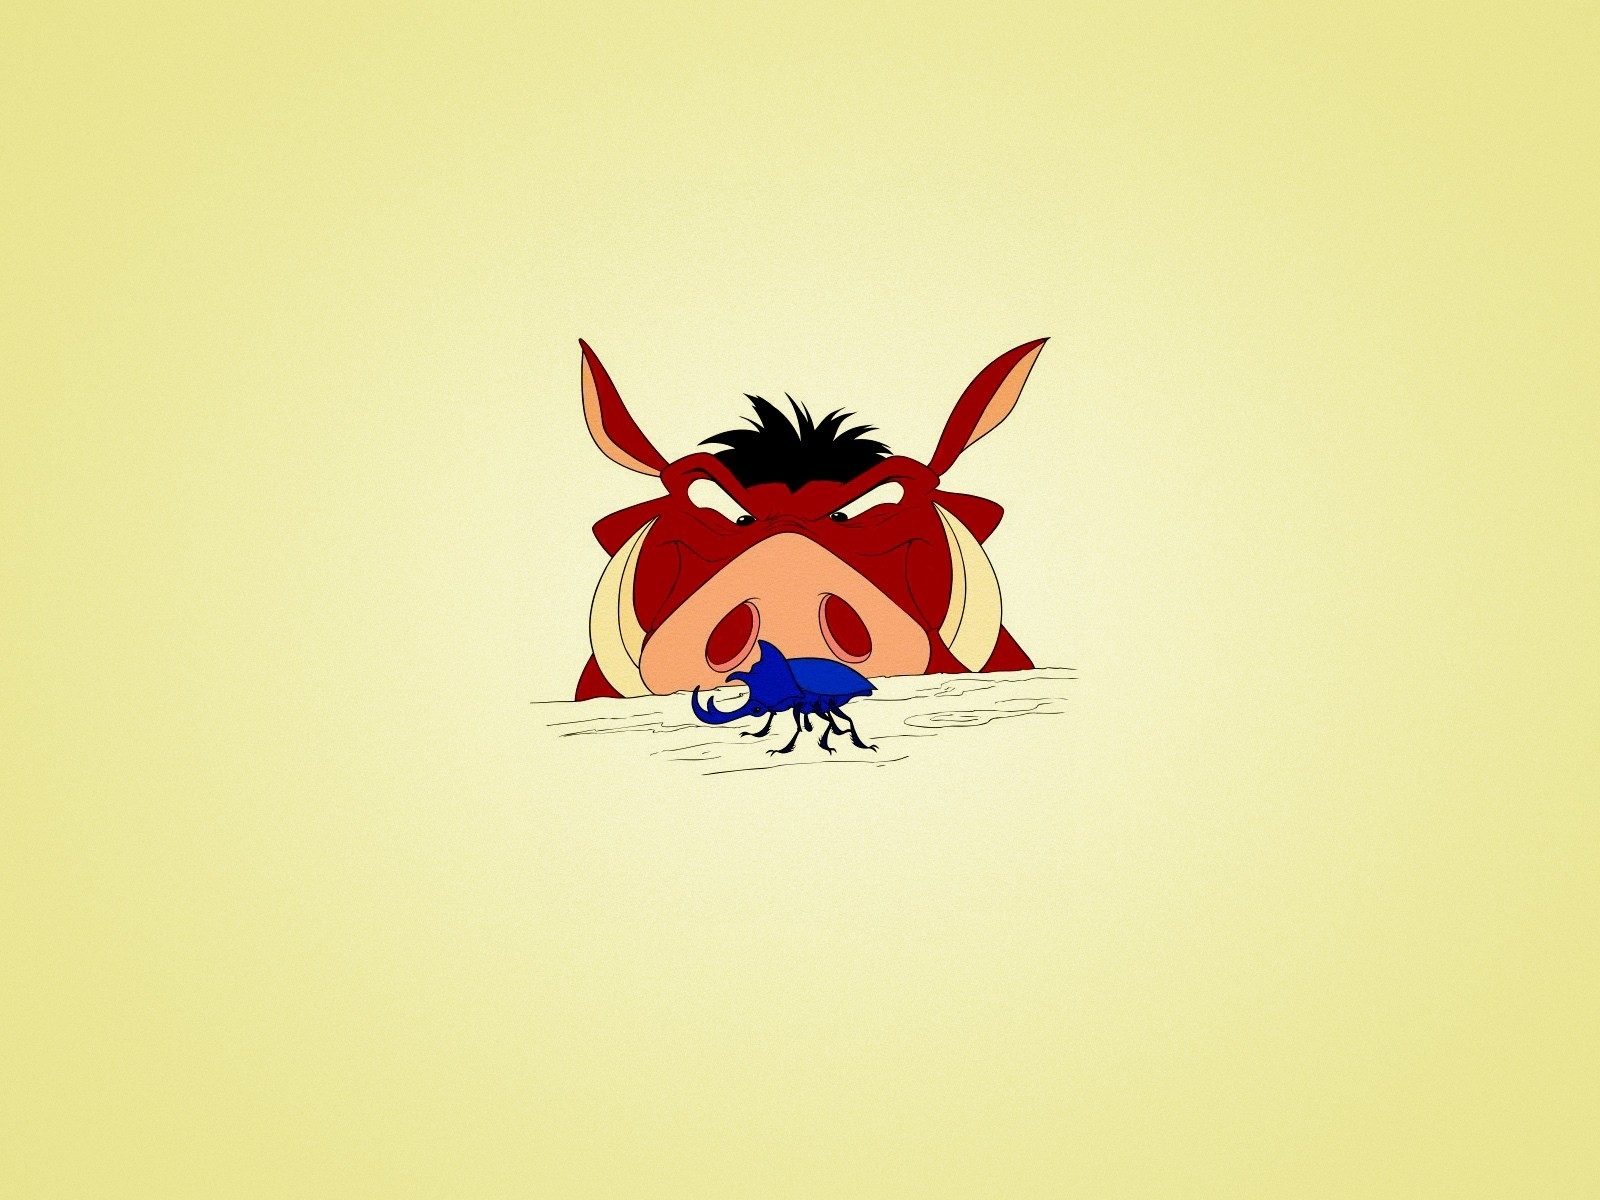 Timon and Pumbaa for 1600 x 1200 resolution